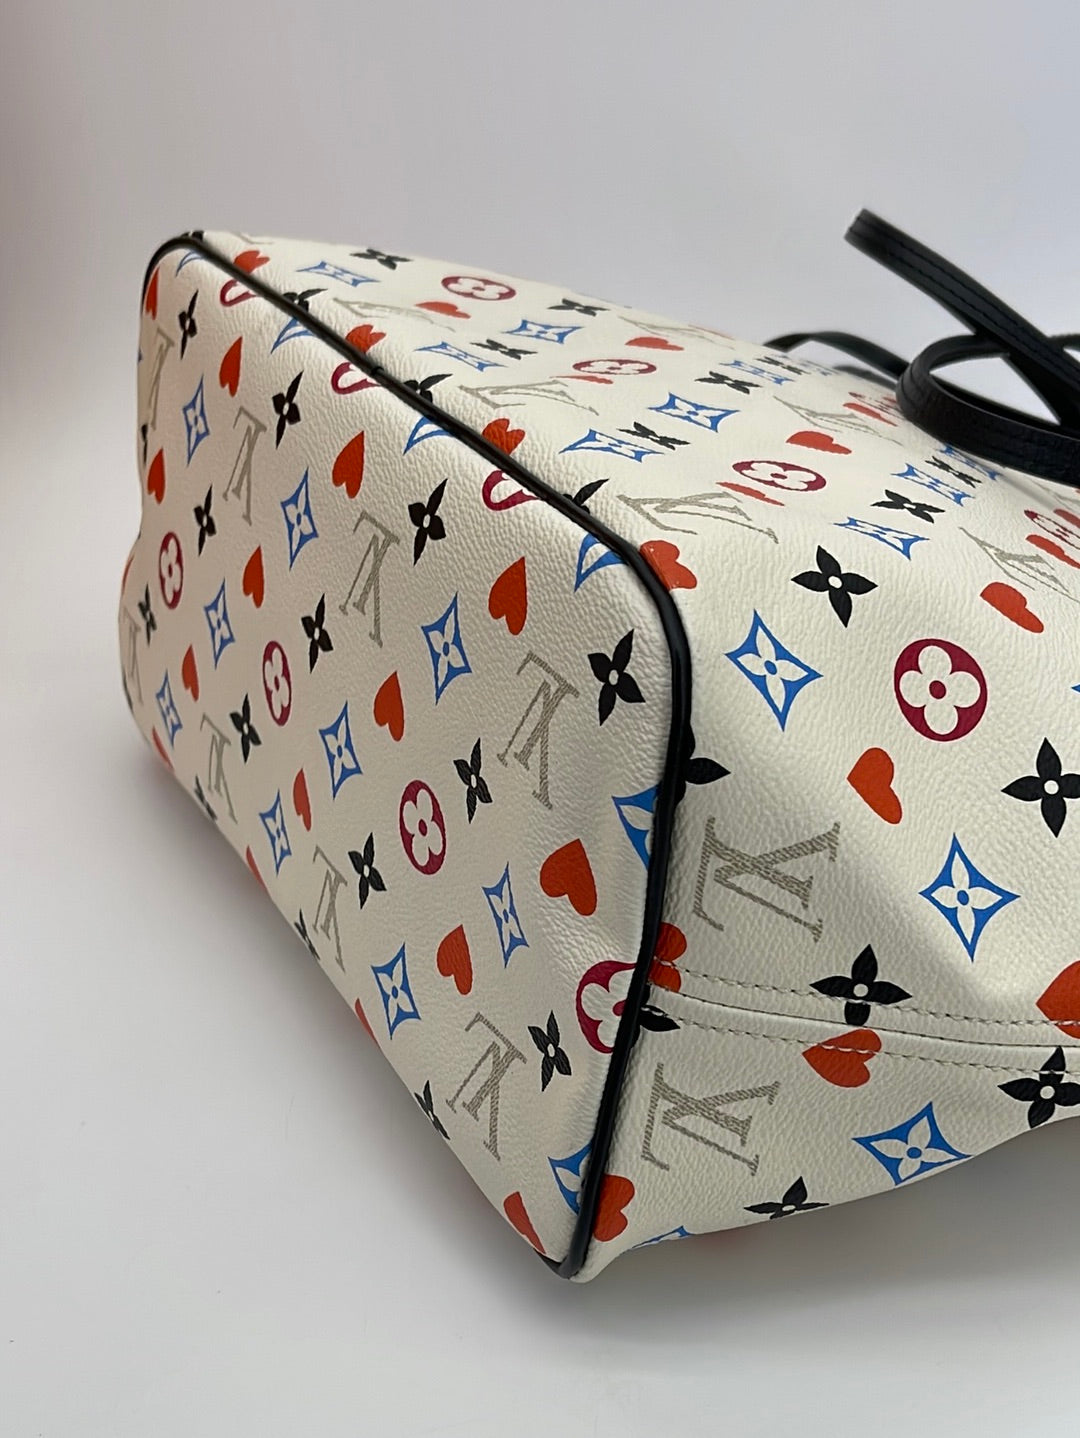 Replica Louis Vuitton Game On Neverfull MM White Bag M57462 BLV348 ในปี 2023